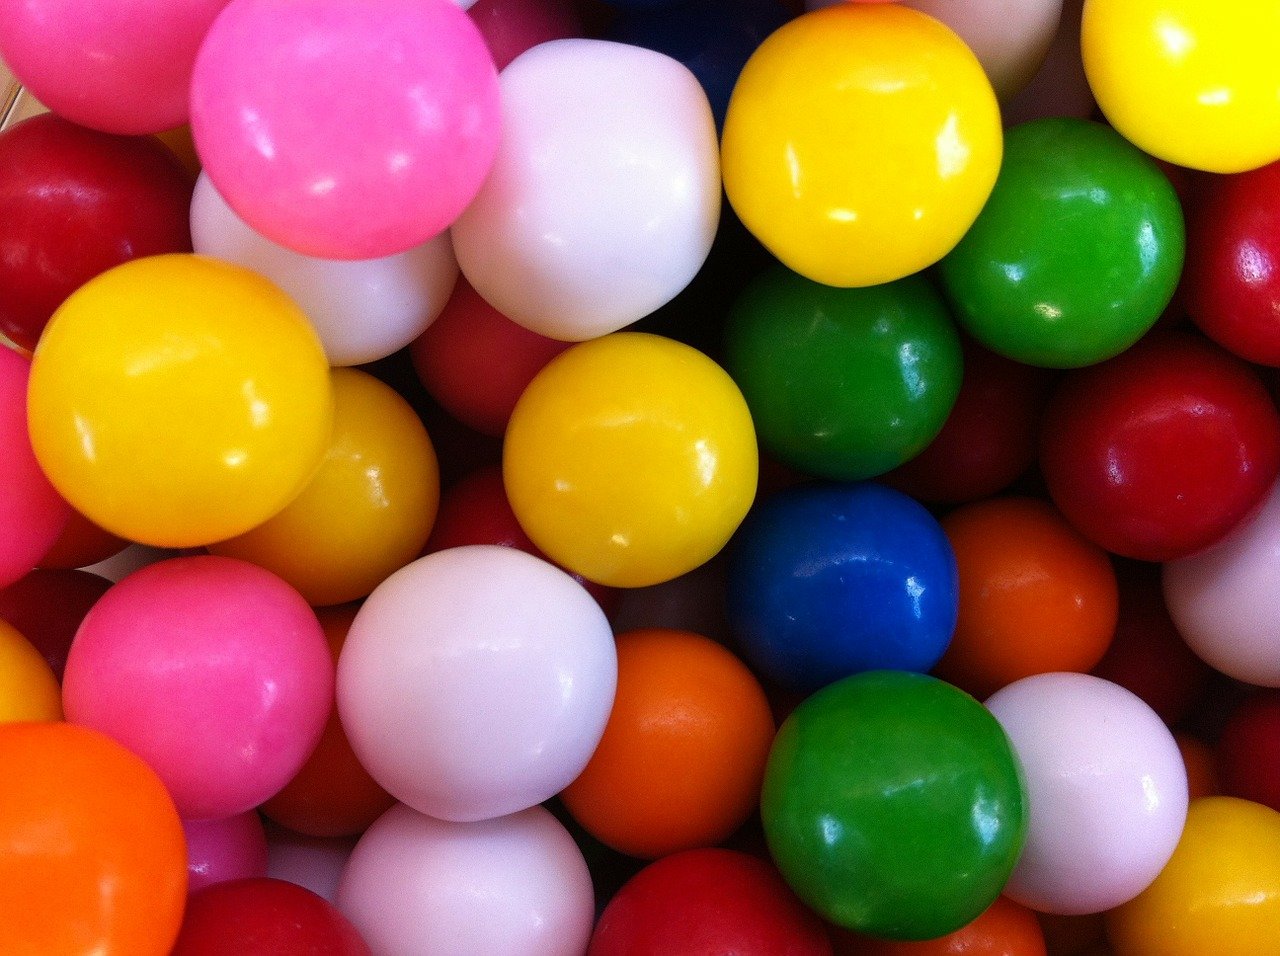 Chewing Gum Reduces Stress - The American Institute of Stress